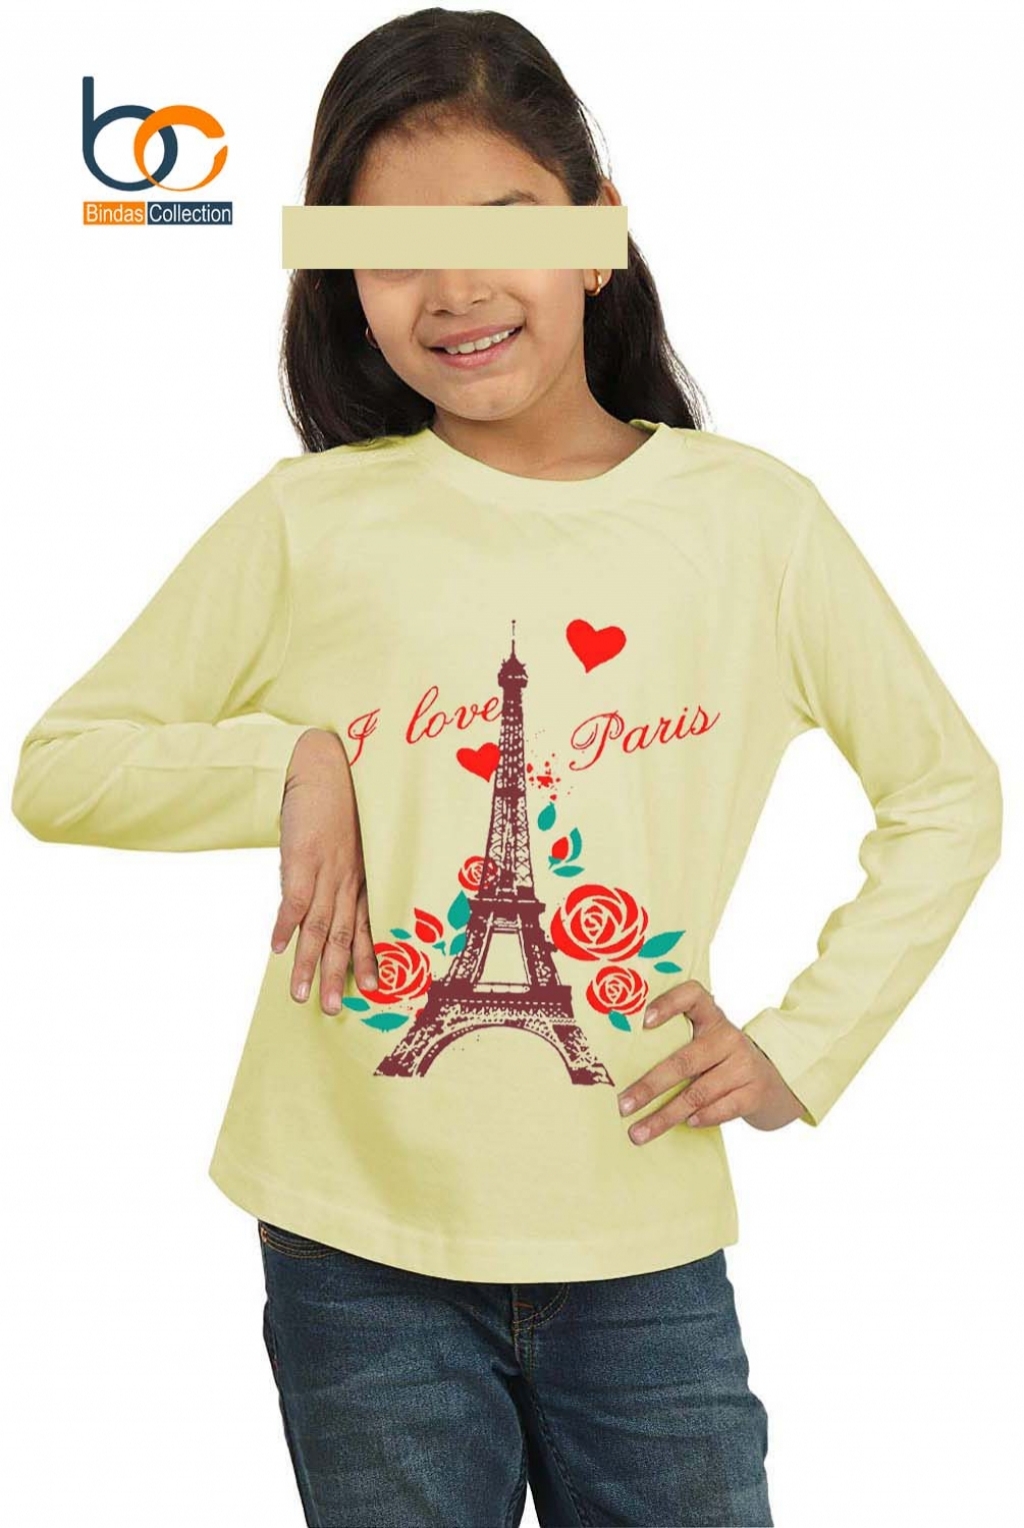 15973038680_girls-t-shirt-polo-t-shirt-branded-t-shirts-in-pakistan-online-t-shirts-pakistan-kids-online-shopping-online-shopping-in-Pakistan.jpg